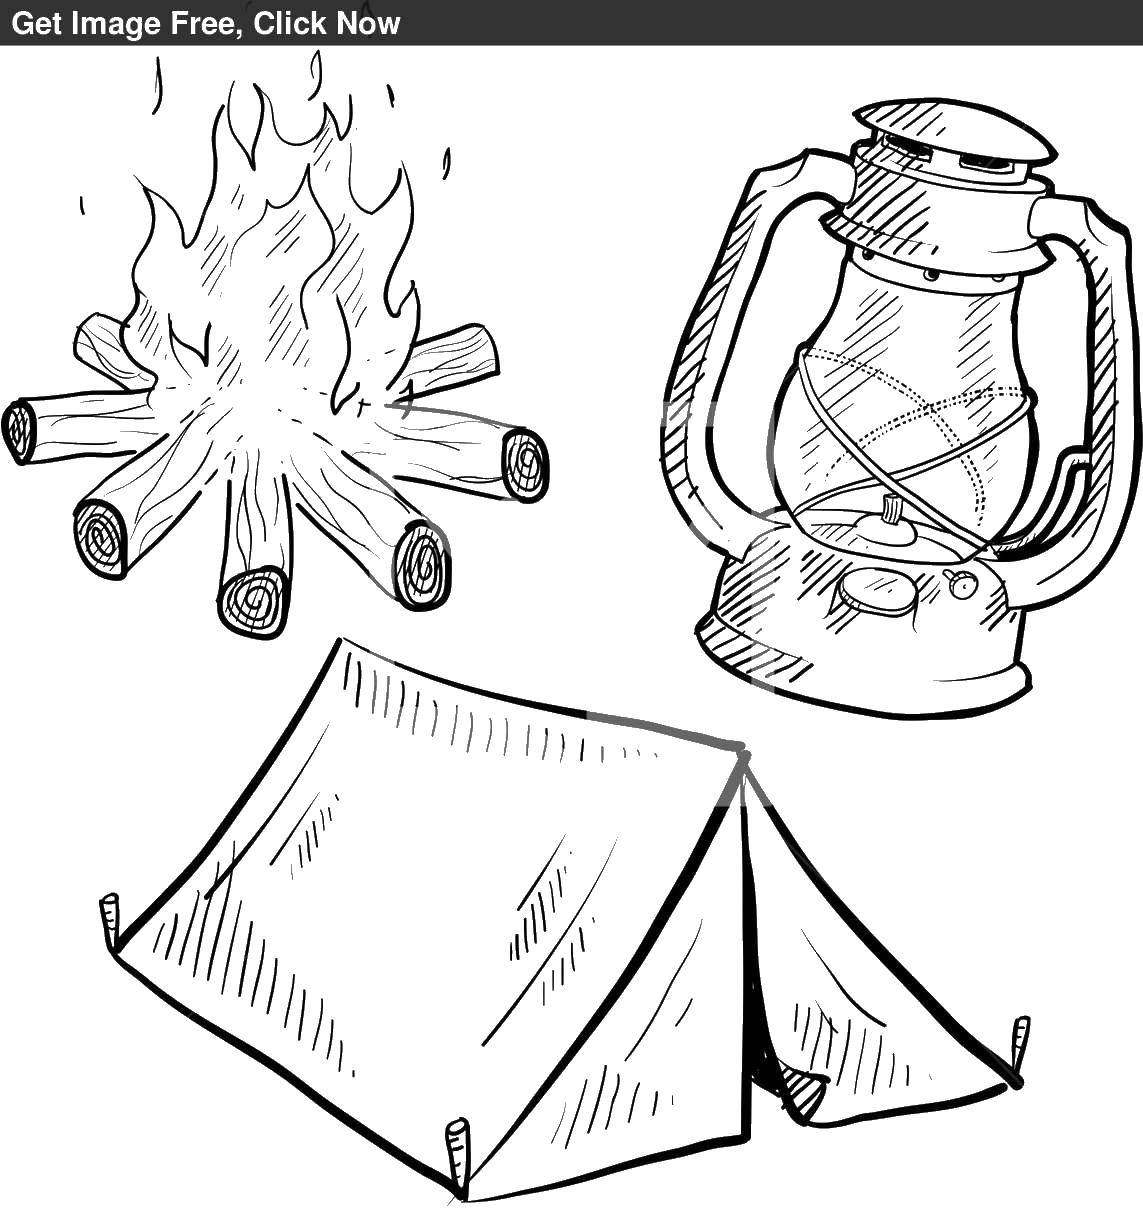 Coloring Items for a hike. Category Camping. Tags:  leisure, camping, tent, campfire.